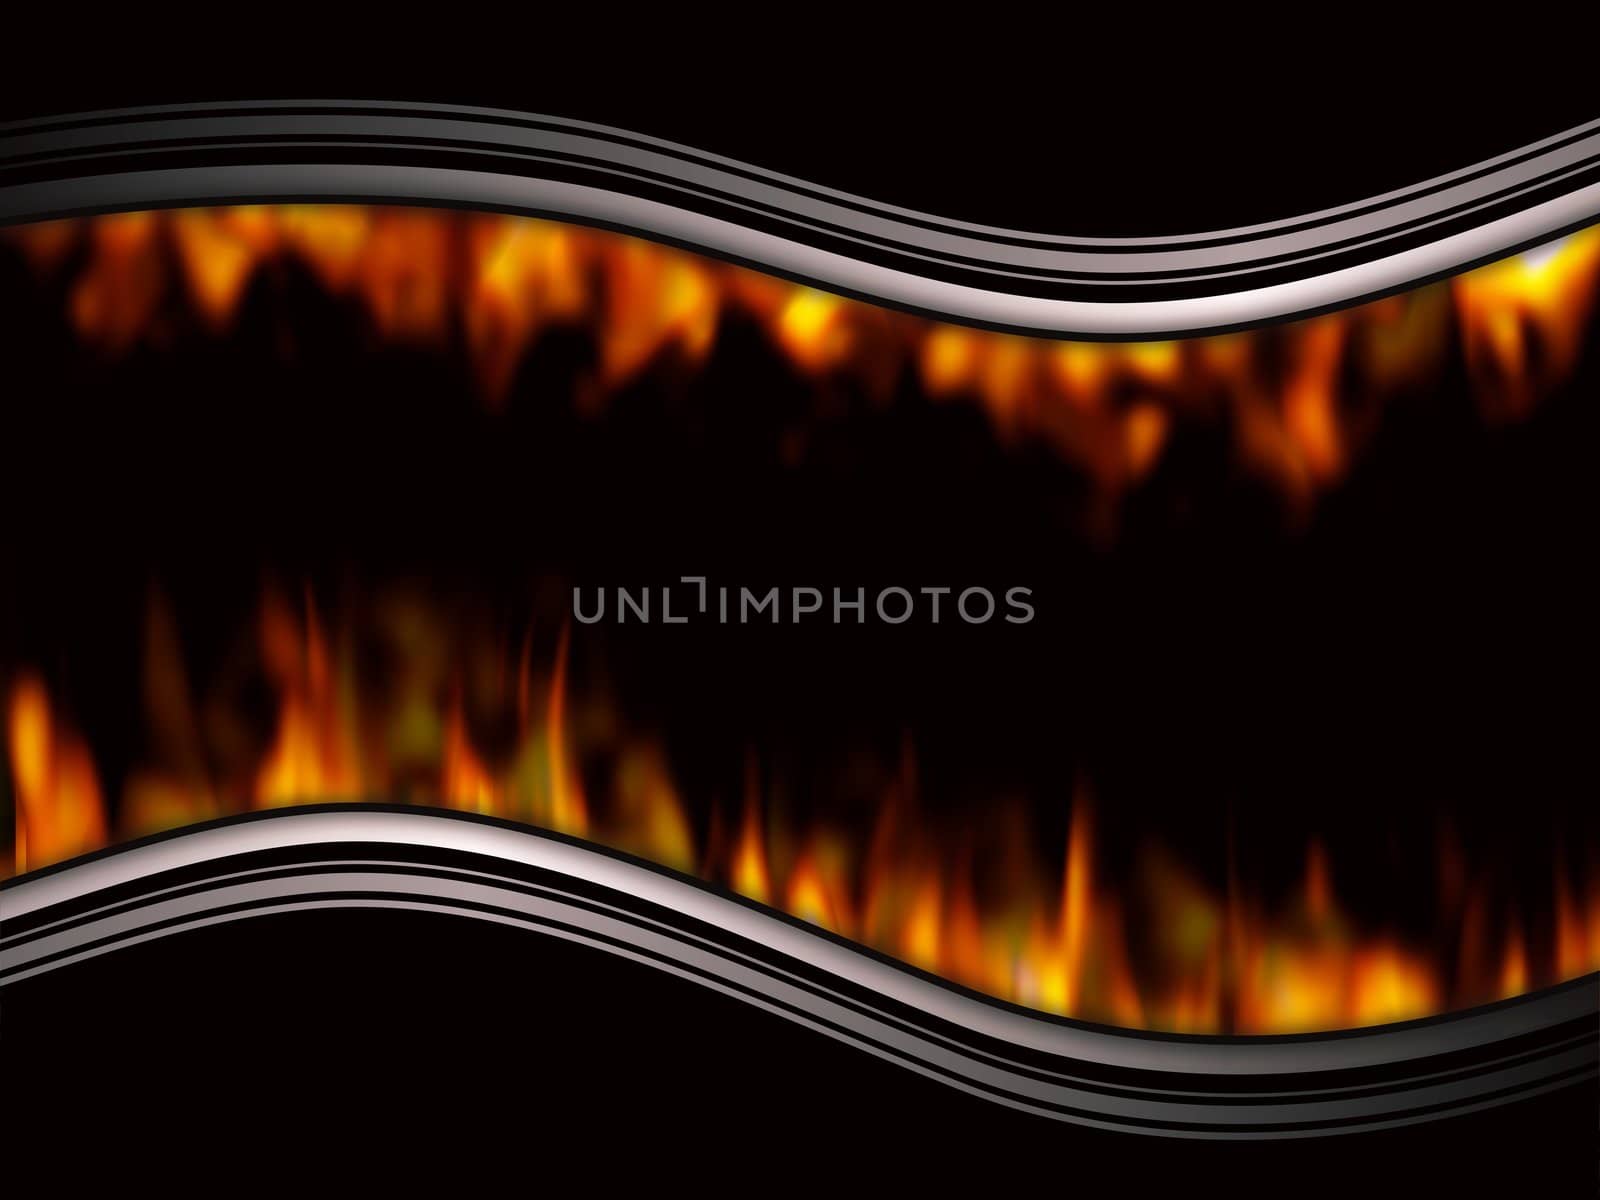 Illustrated background with curves and flames